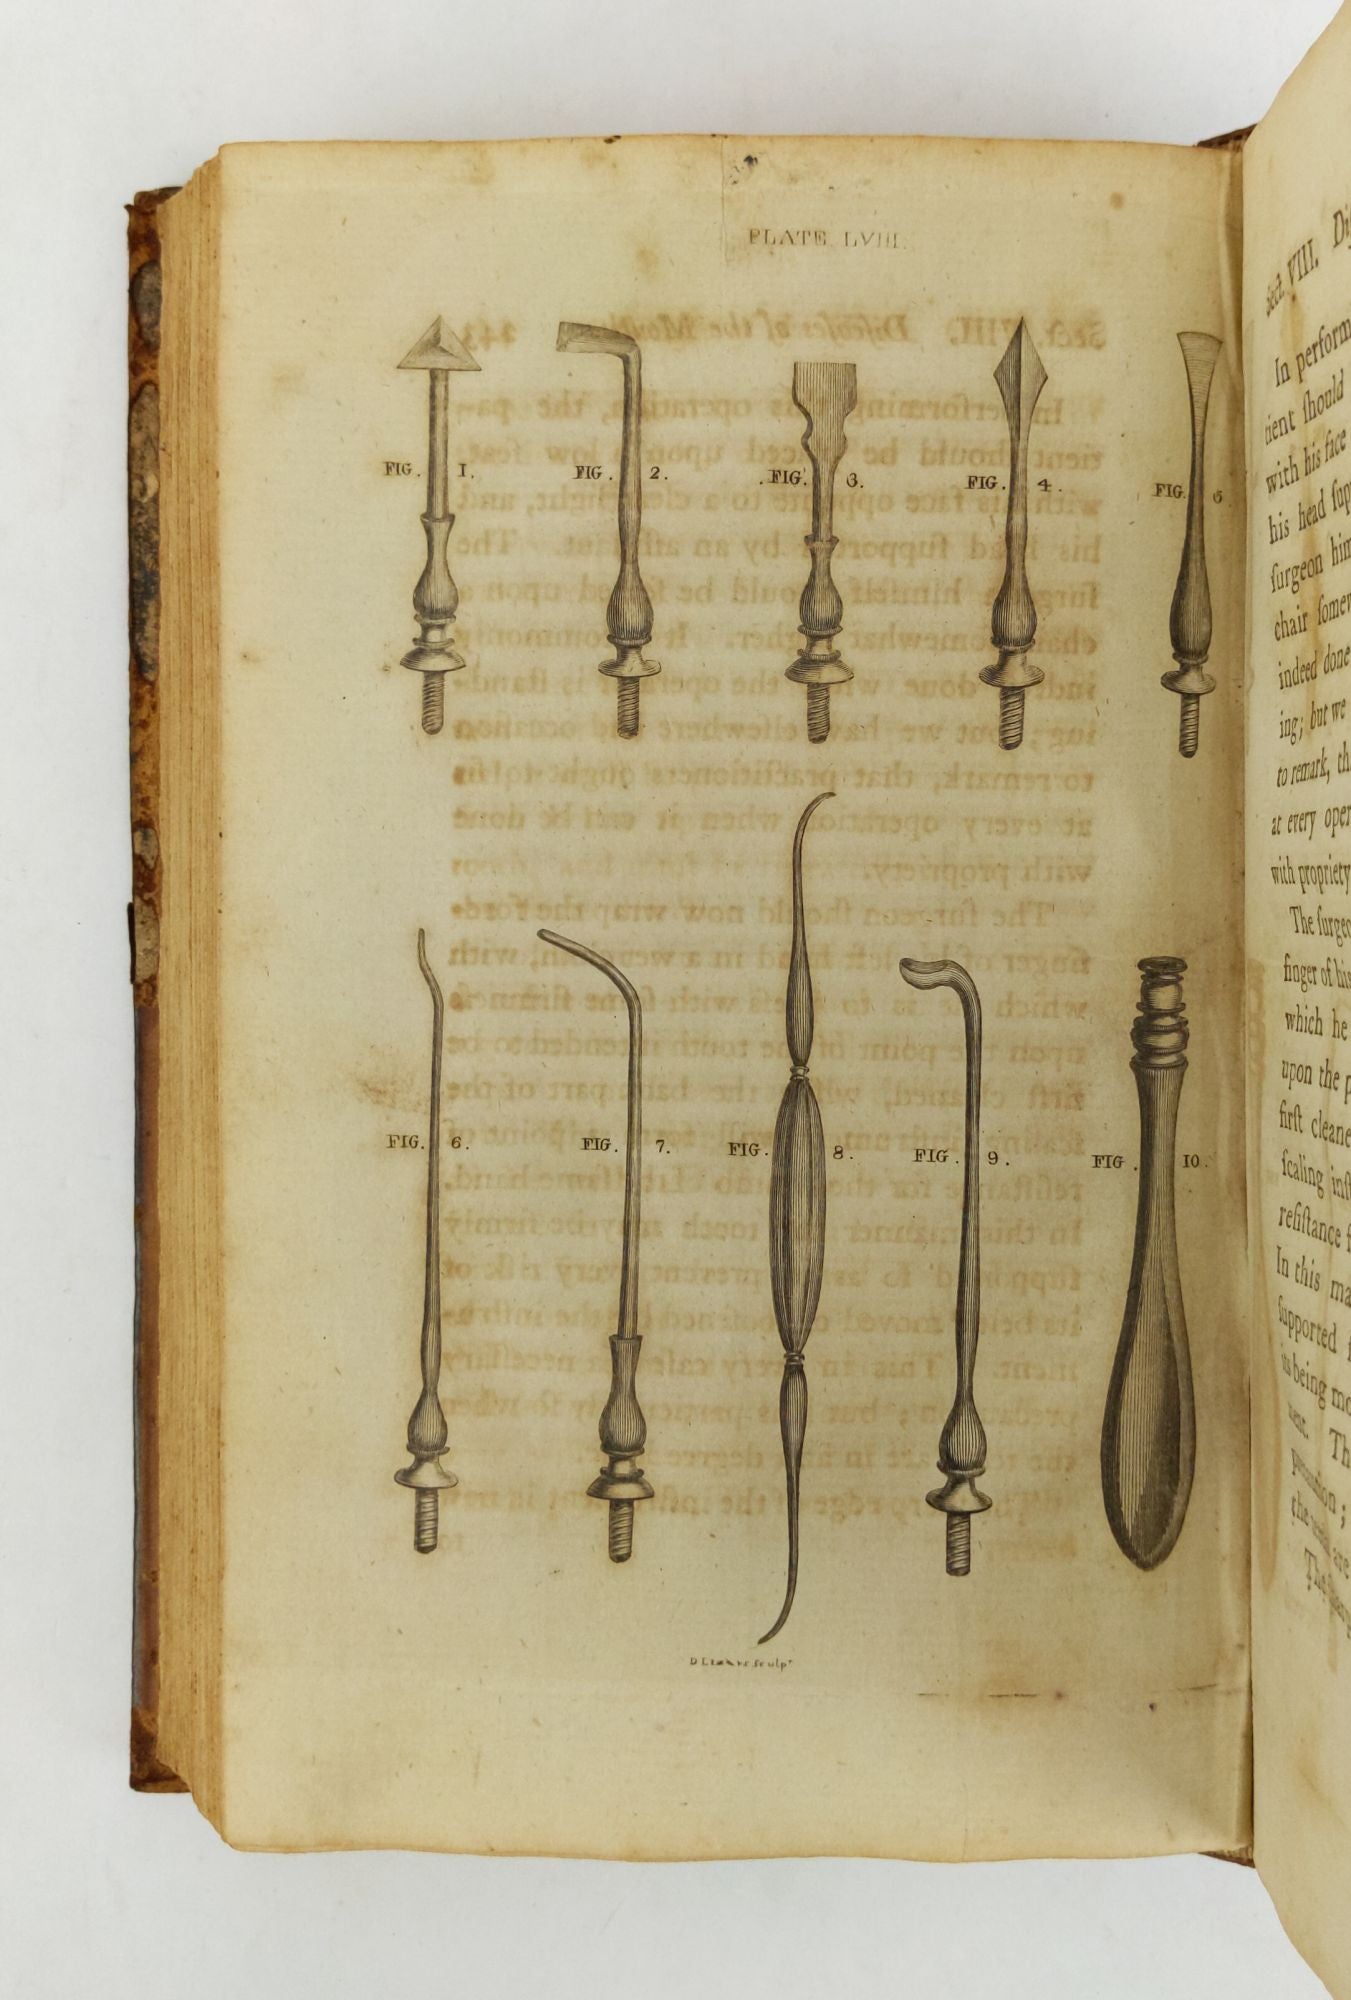 Product Image for A SYSTEM OF SURGERY. ILLUSTRATED WITH COPPERPLATES. (Volumes III - IV, Only)